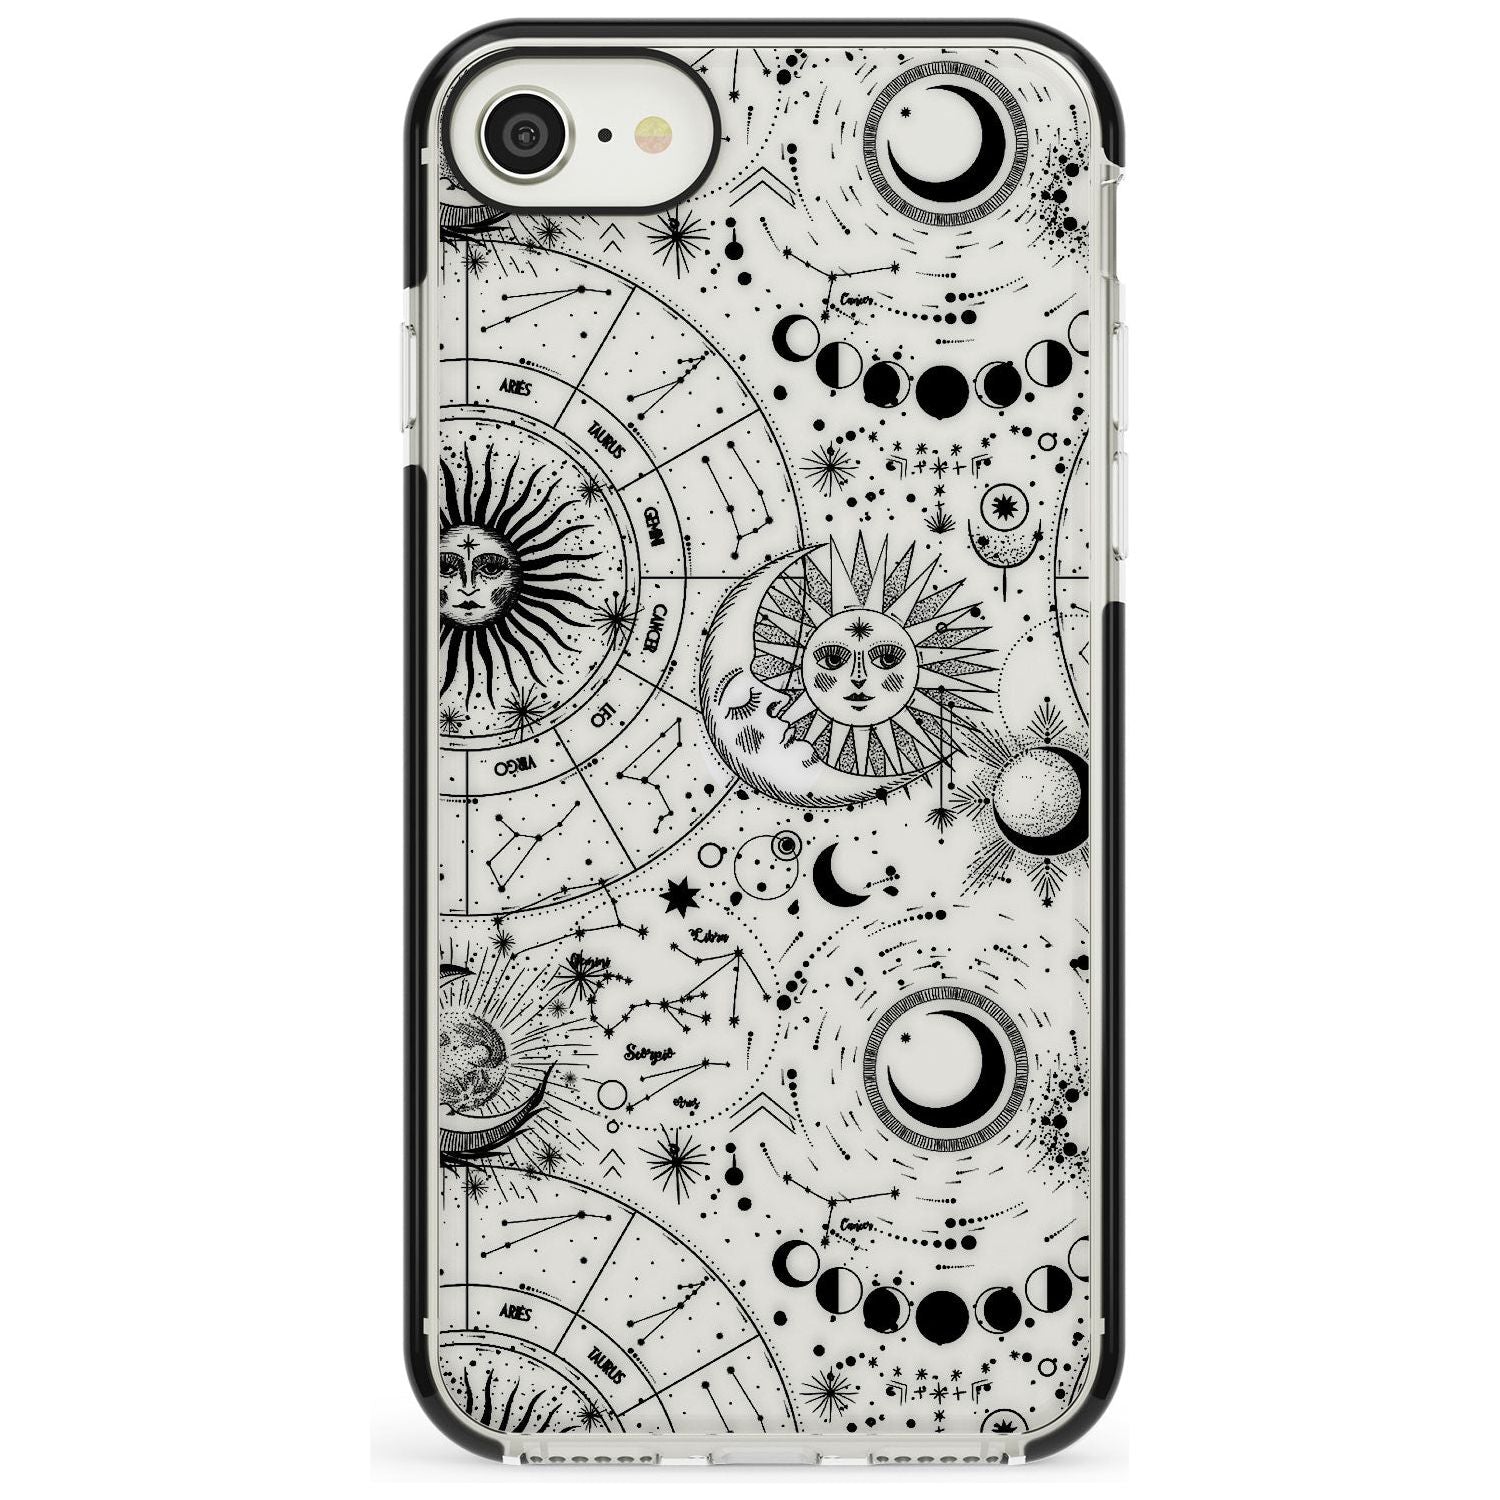 Suns, Moons, Zodiac Signs Astrological Black Impact Phone Case for iPhone SE 8 7 Plus